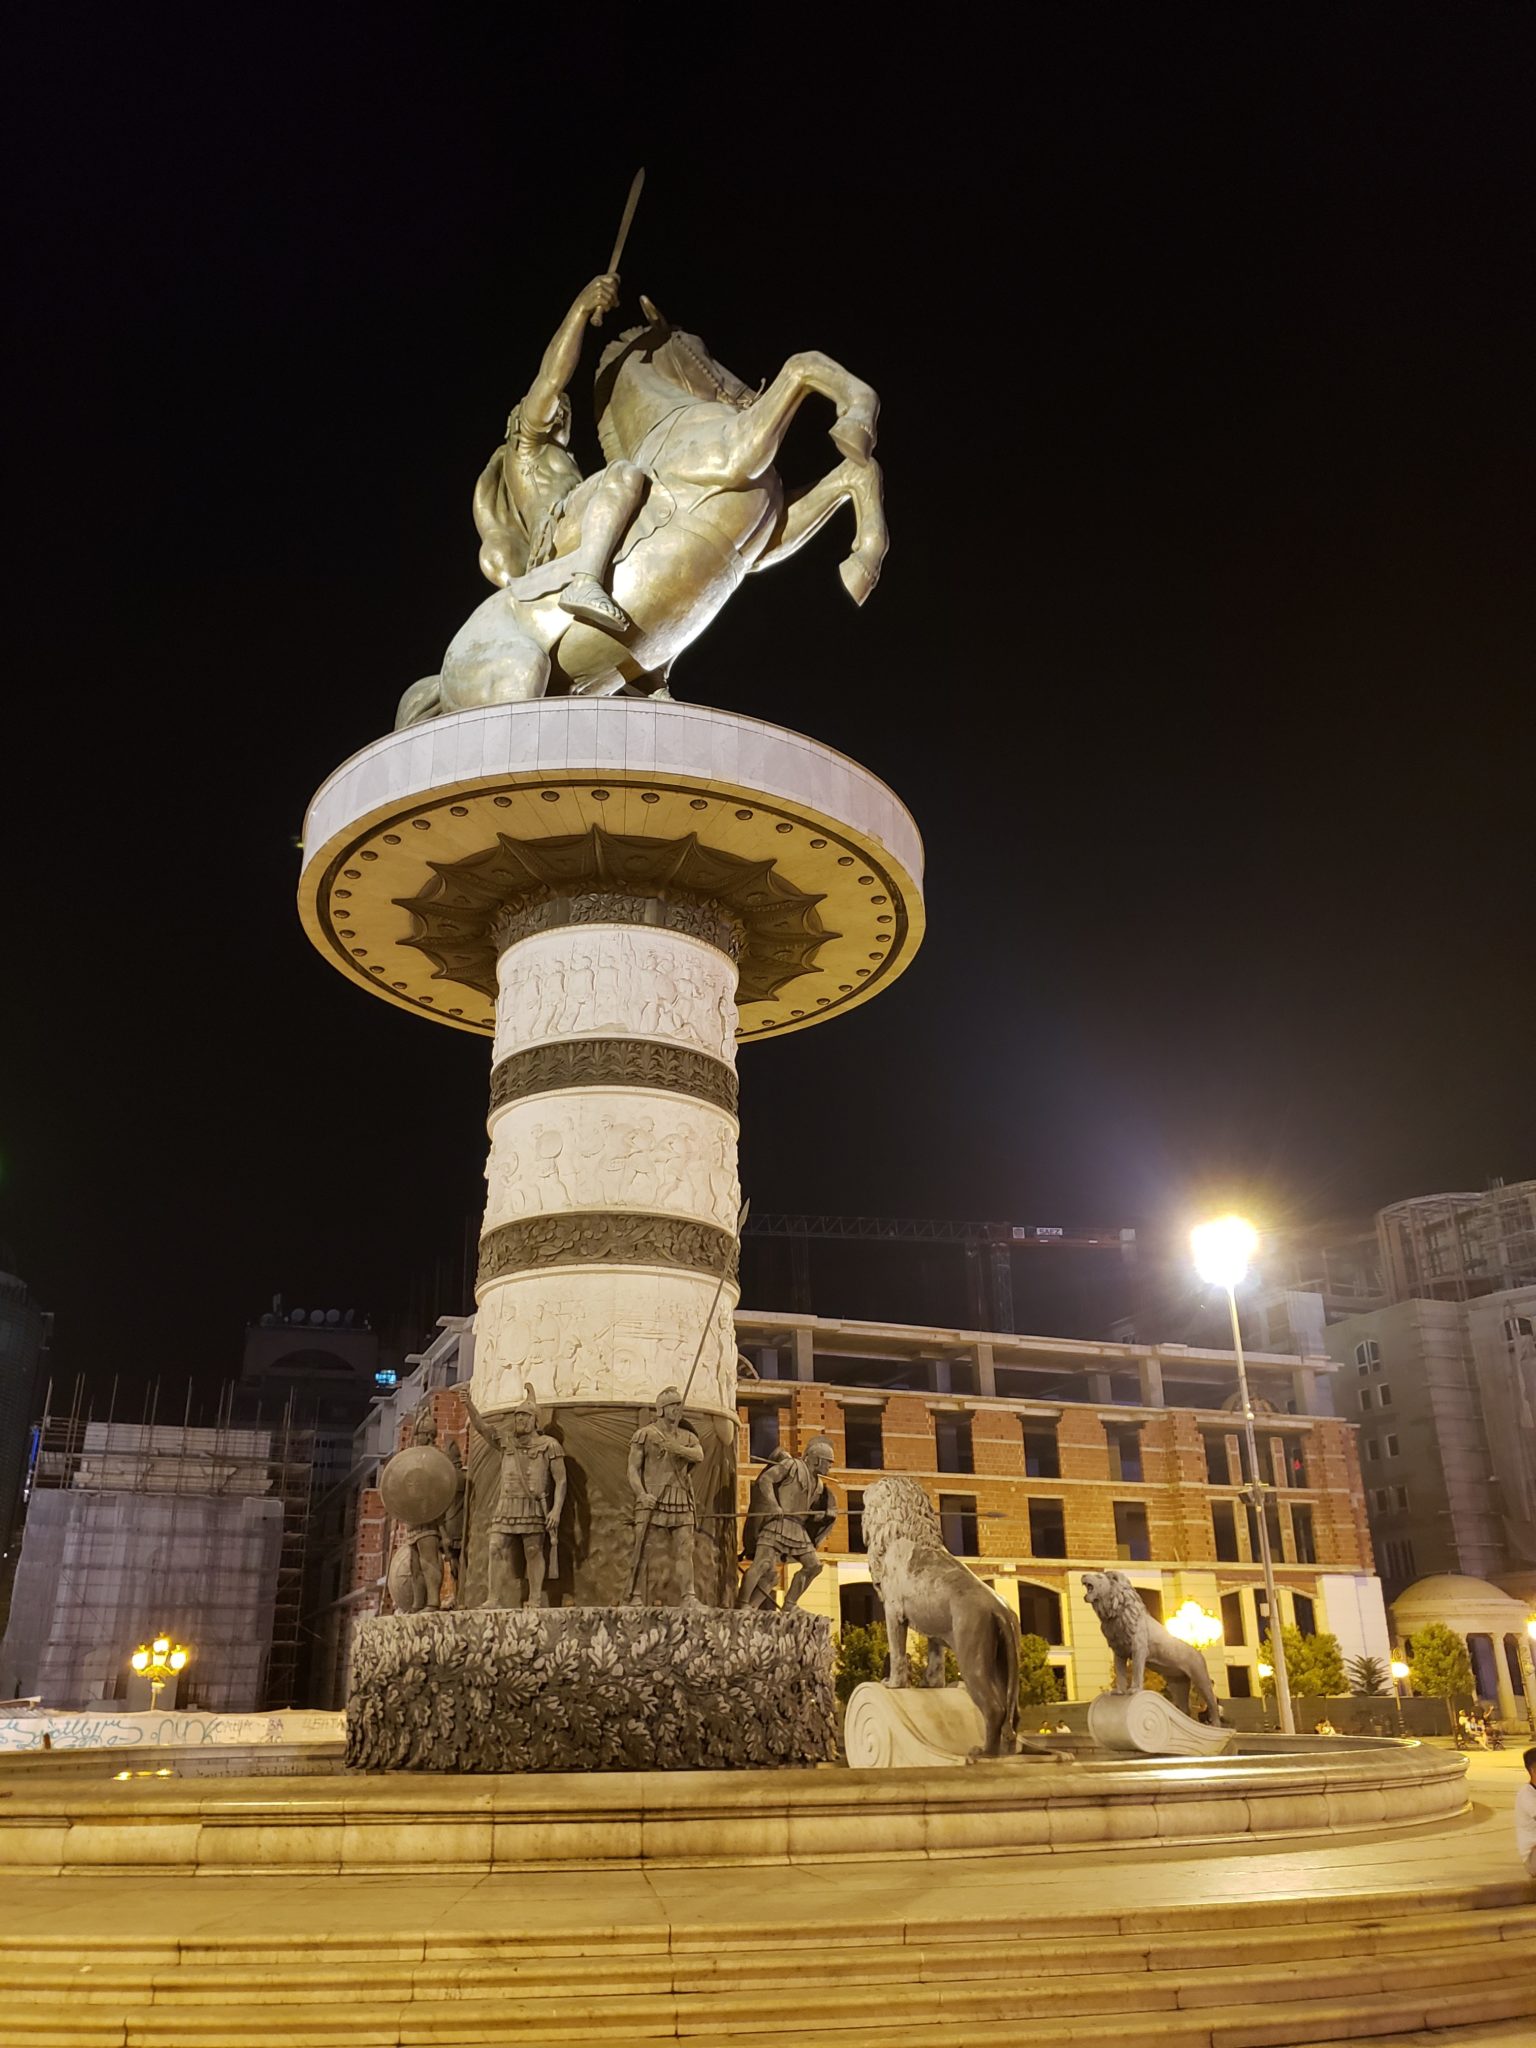 a statue of a man riding a horse on a pedestal in a city